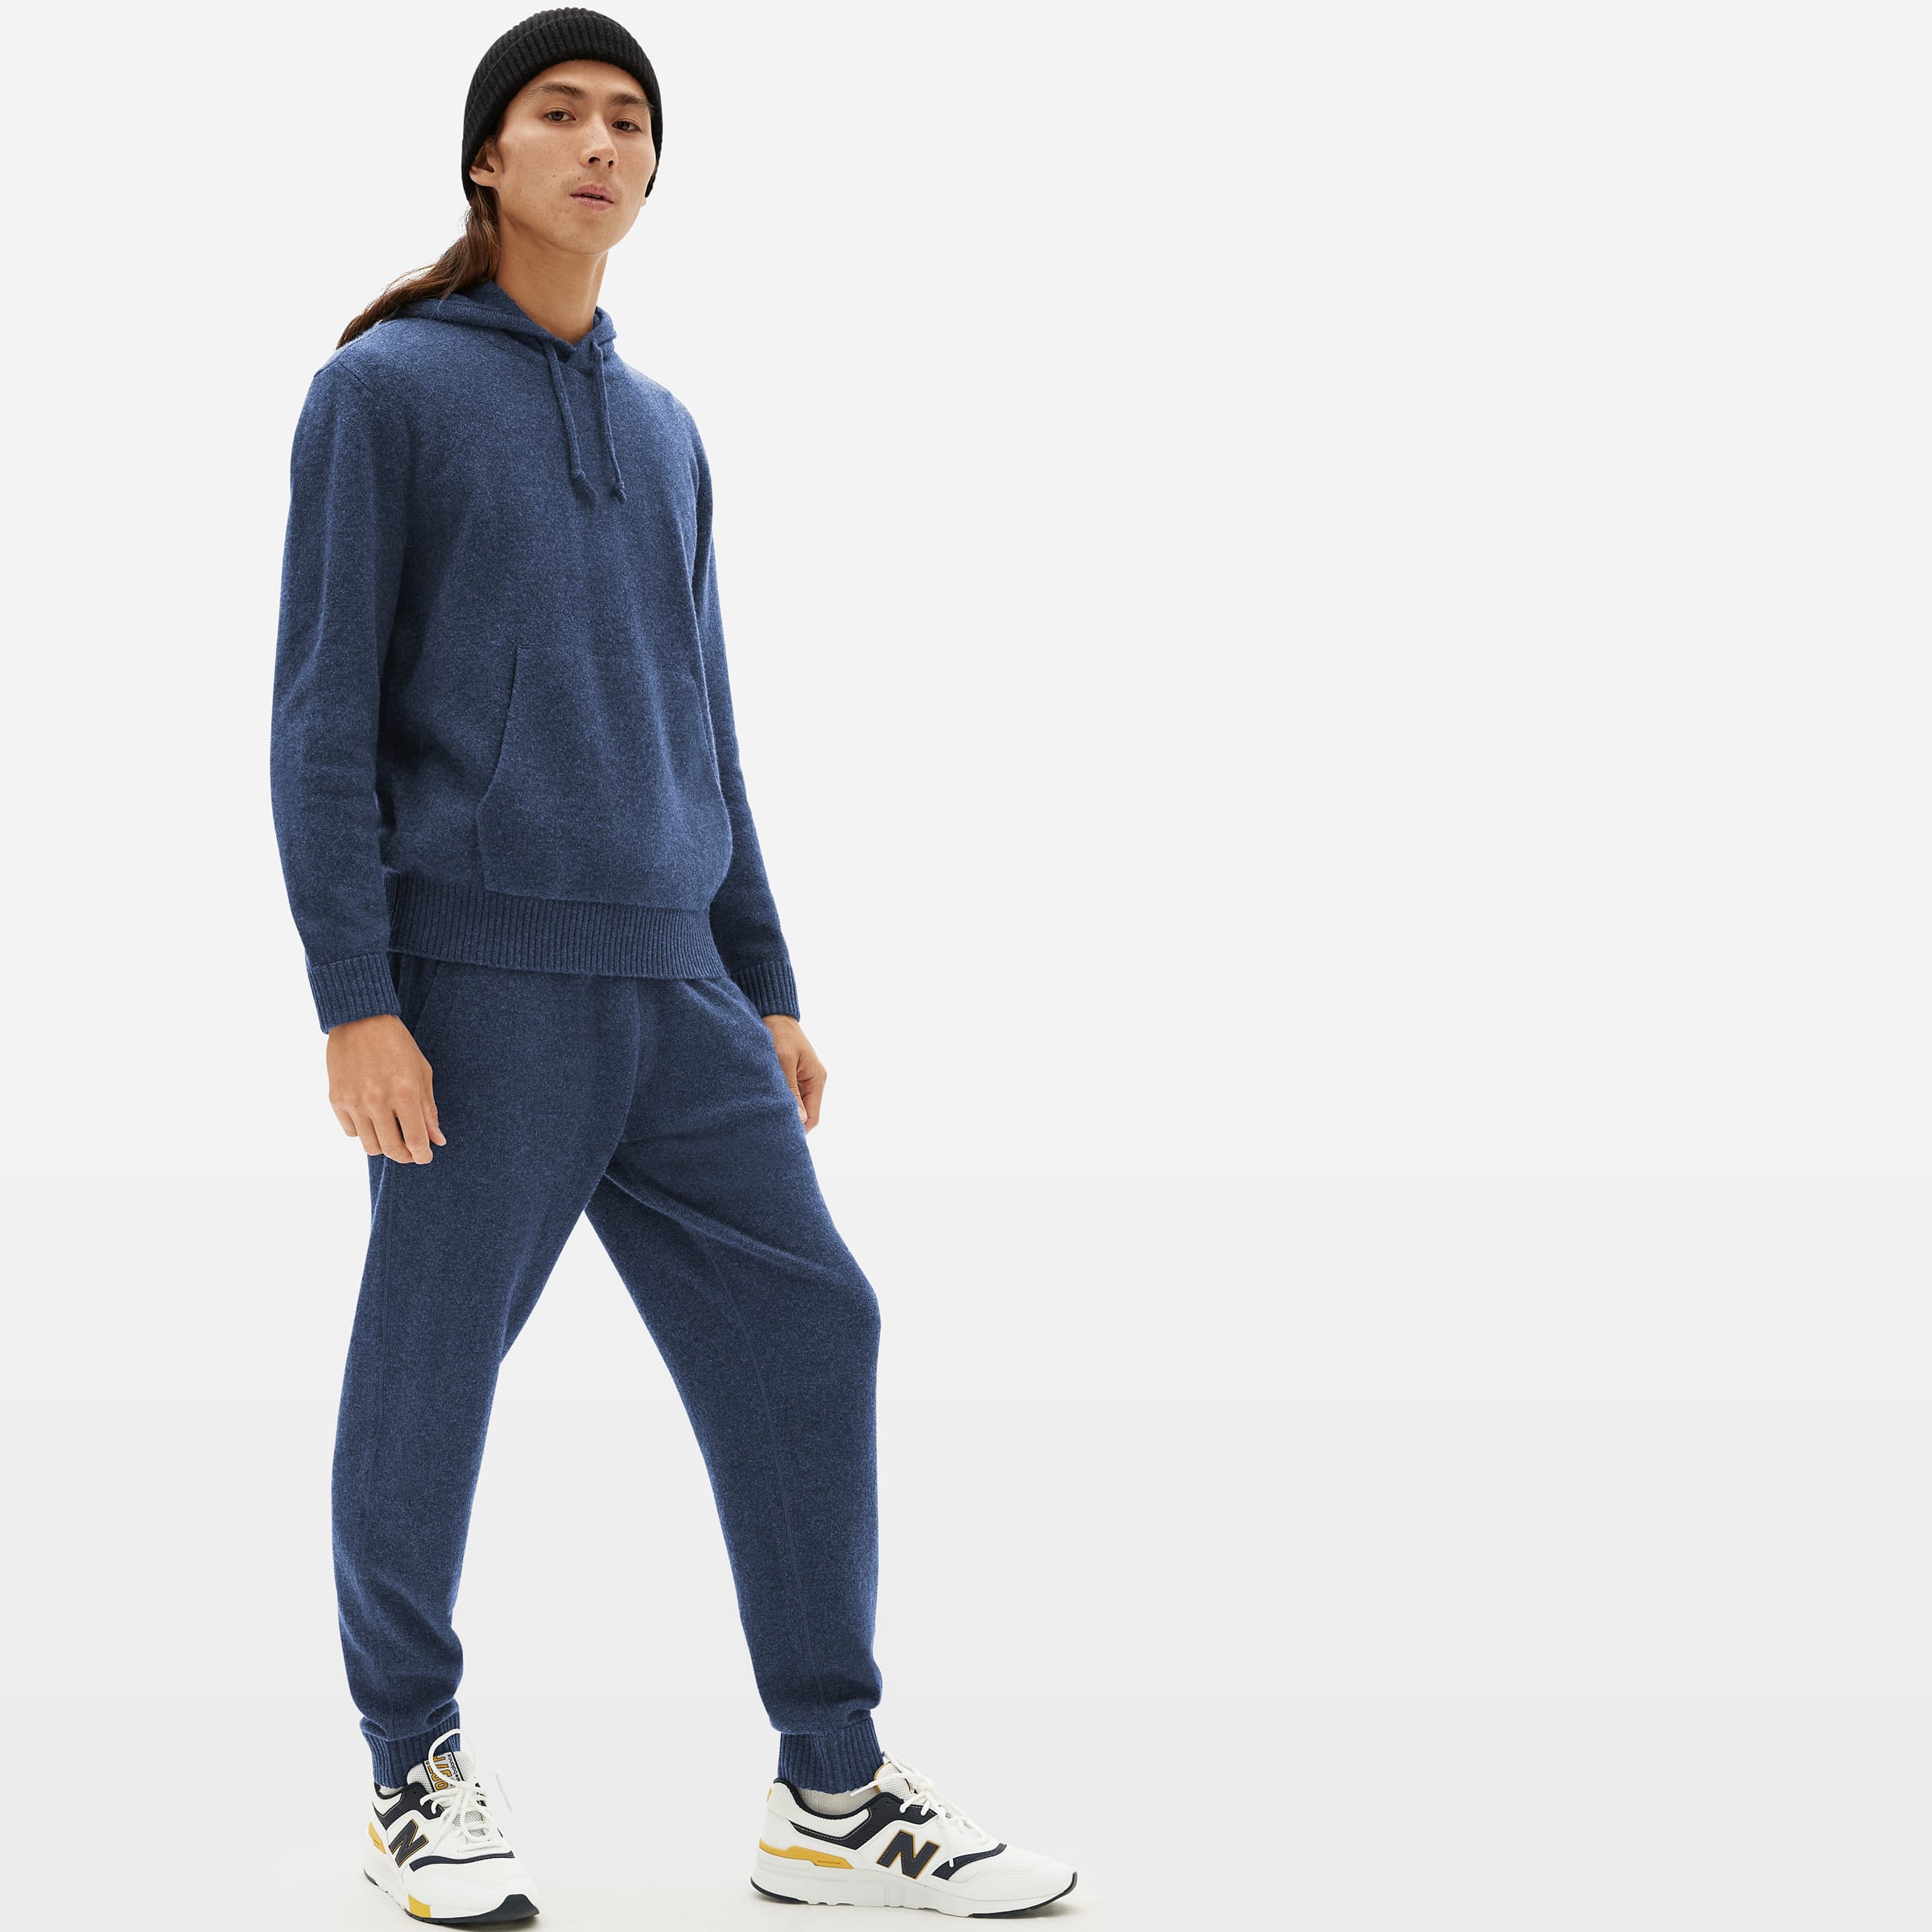 The Felted Merino Track Pant